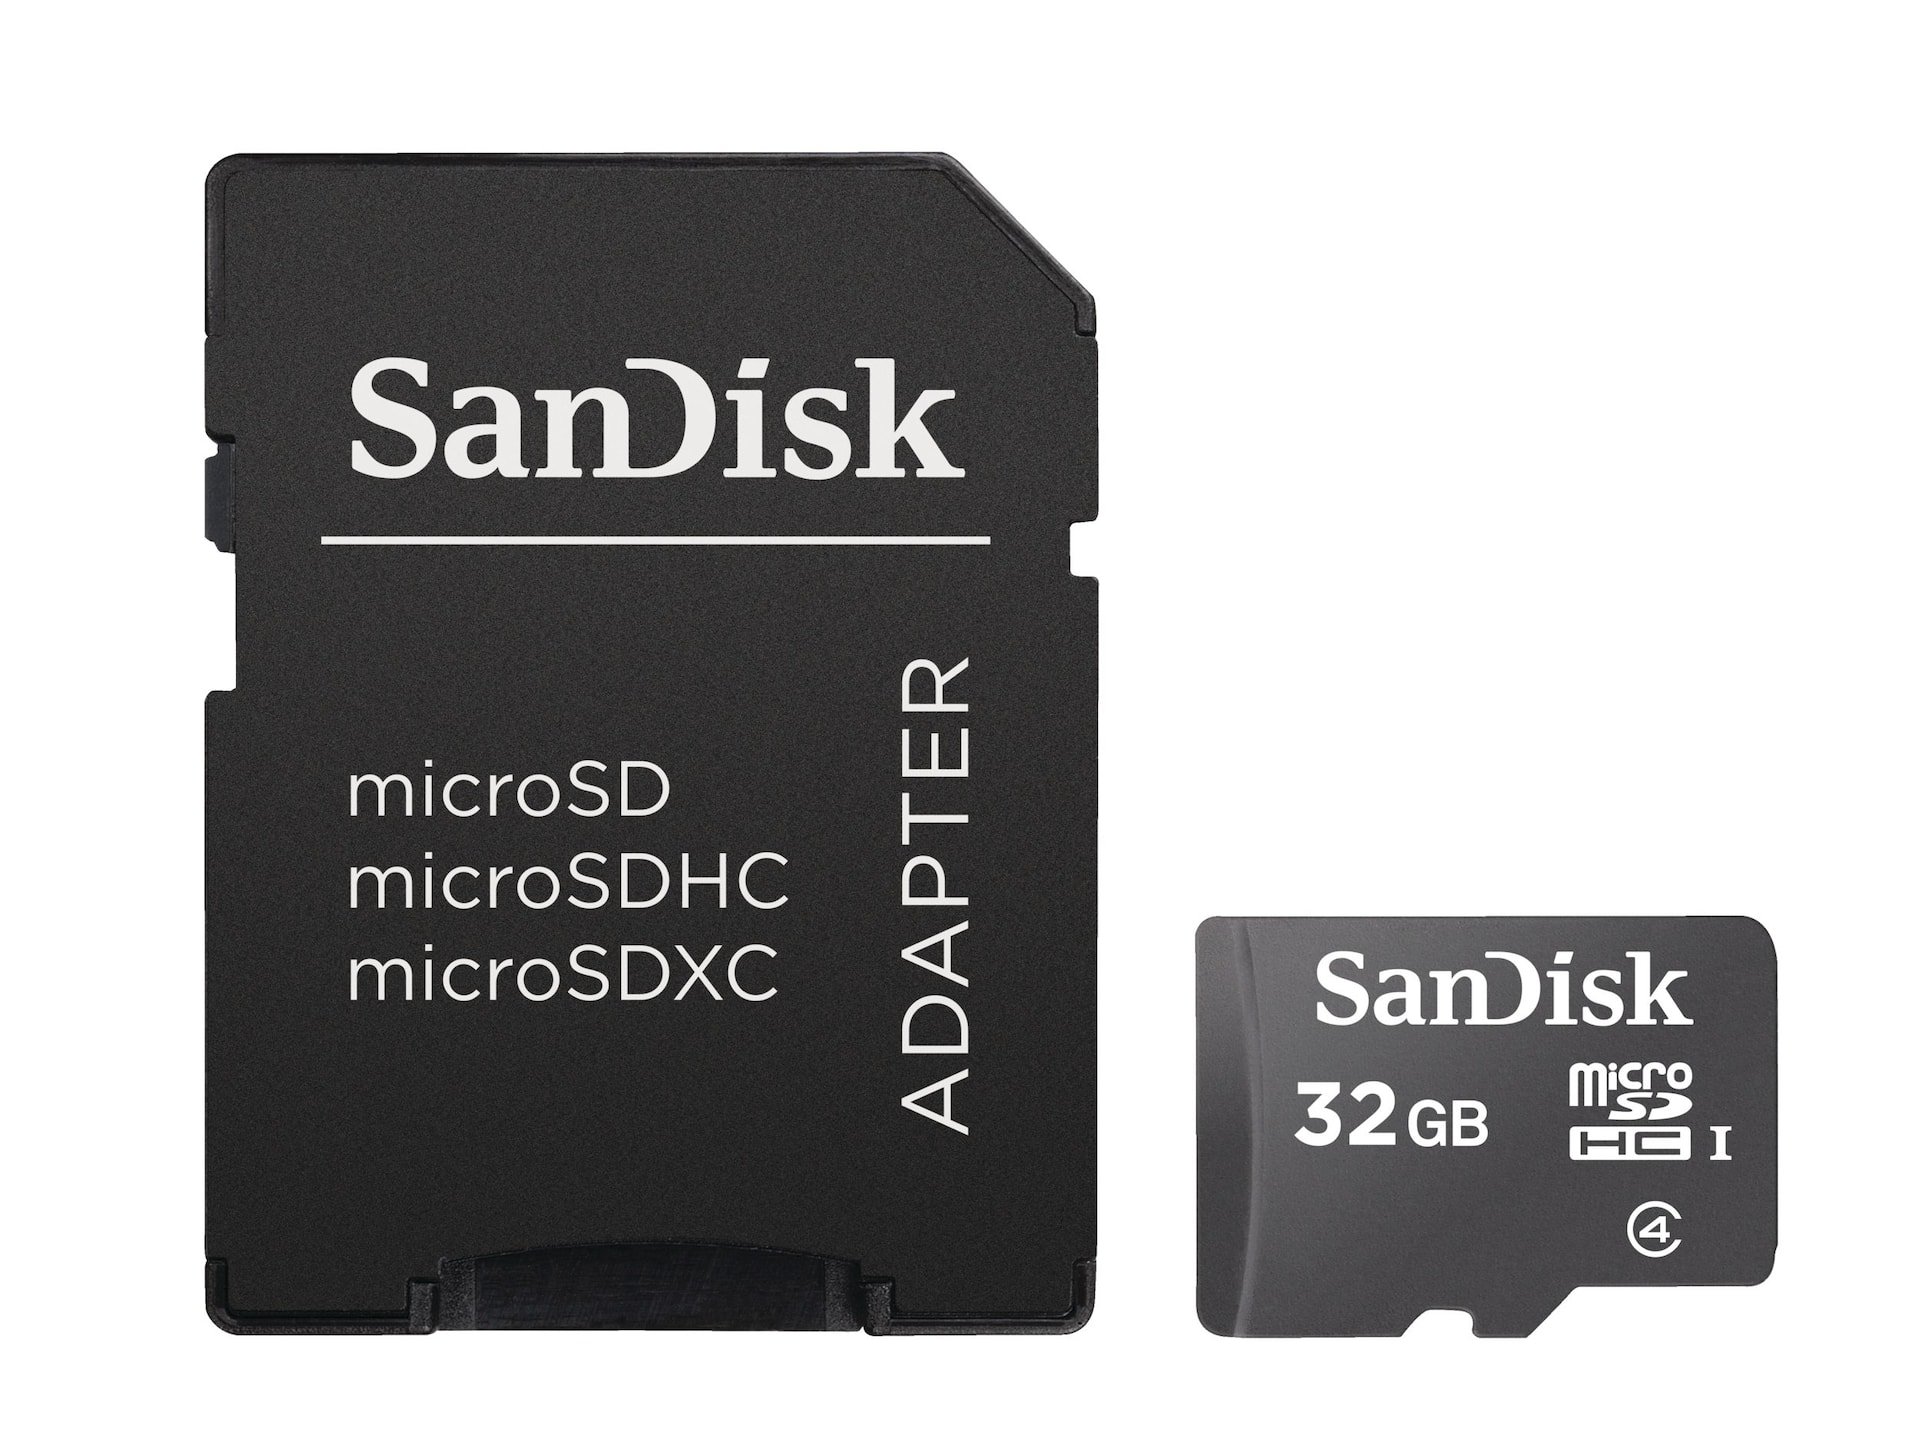 SanDisk 32GB Micro SDHC Class 4 UHS-I Memory Card with Adapter